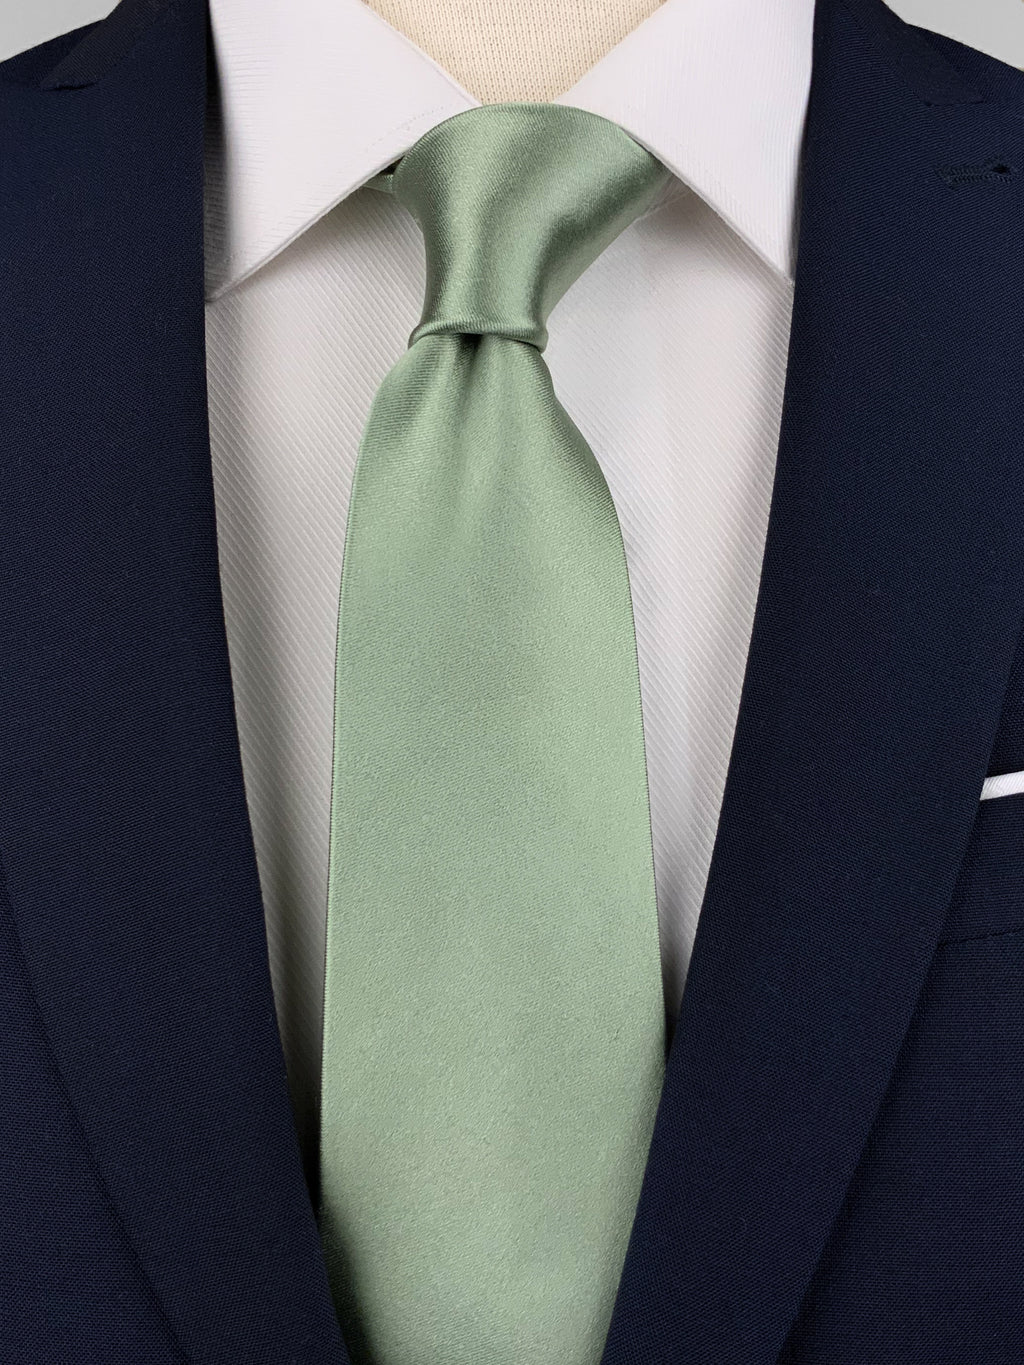 Sage green mulberry silk satin tie worn with a white shirt and a navy blue suit